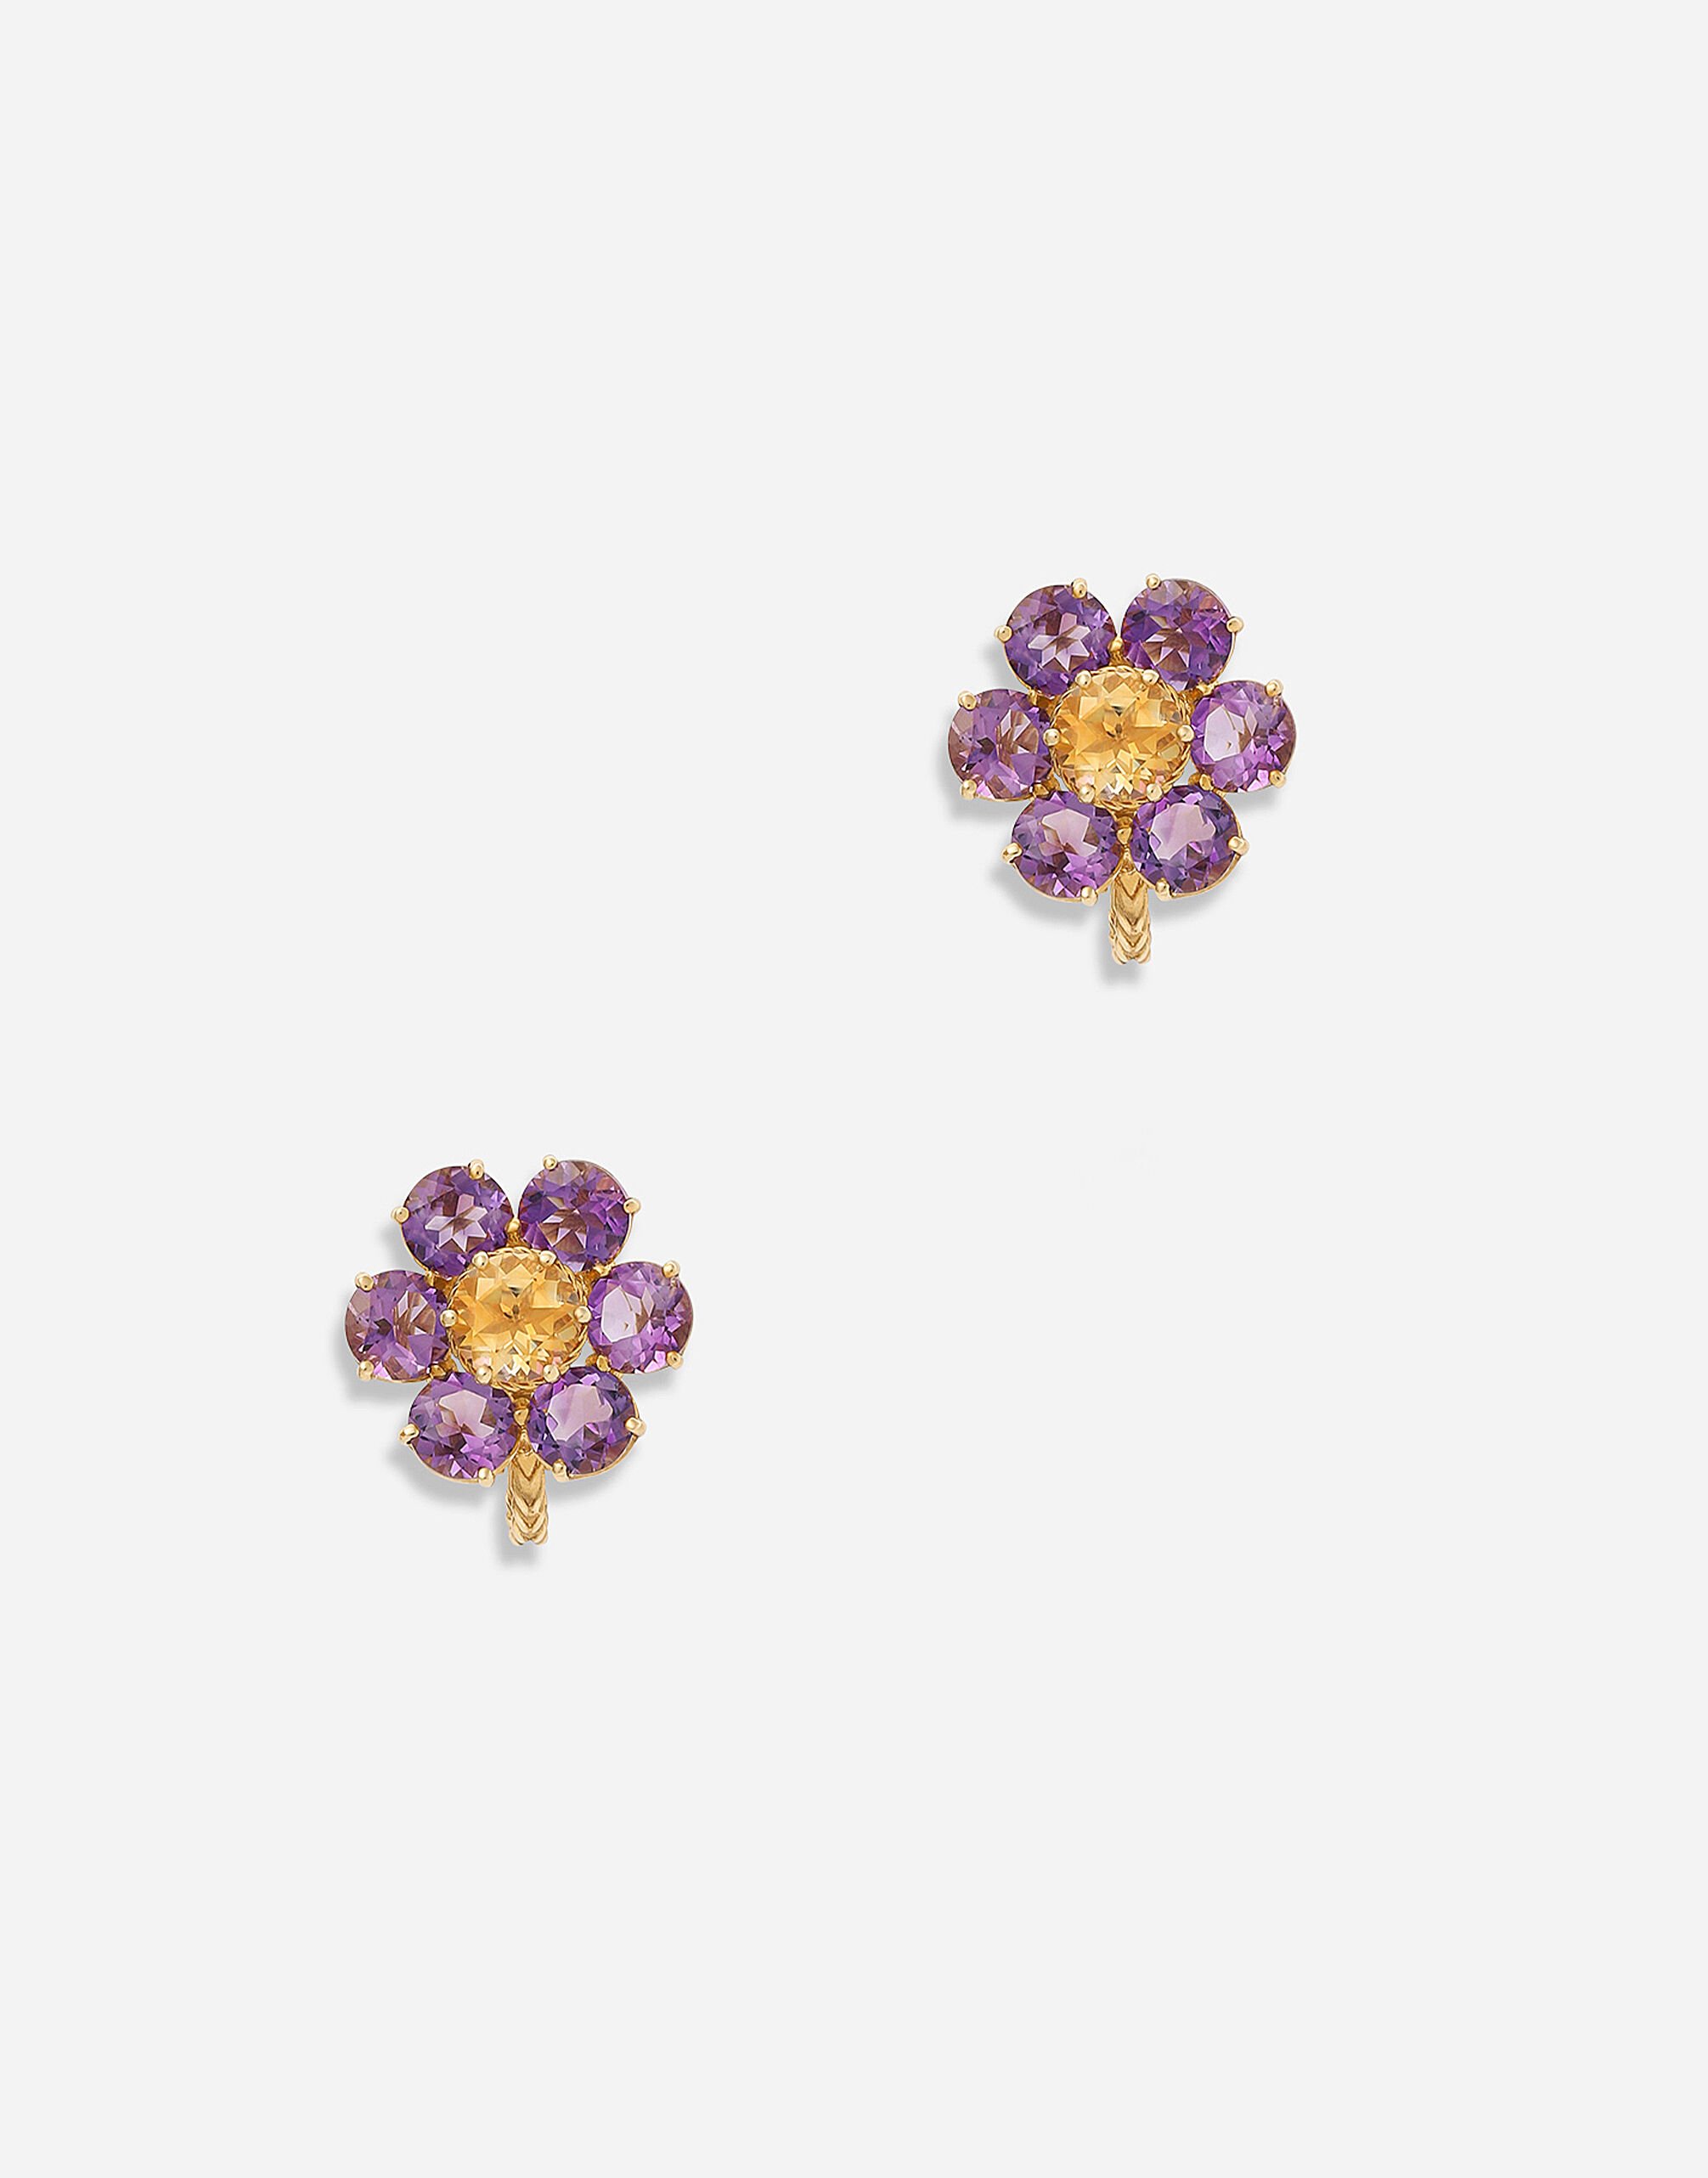 Dolce & Gabbana Spring earrings in yellow 18kt gold with amethyst flower motif Yellow Gold WAQR2GWMIX1